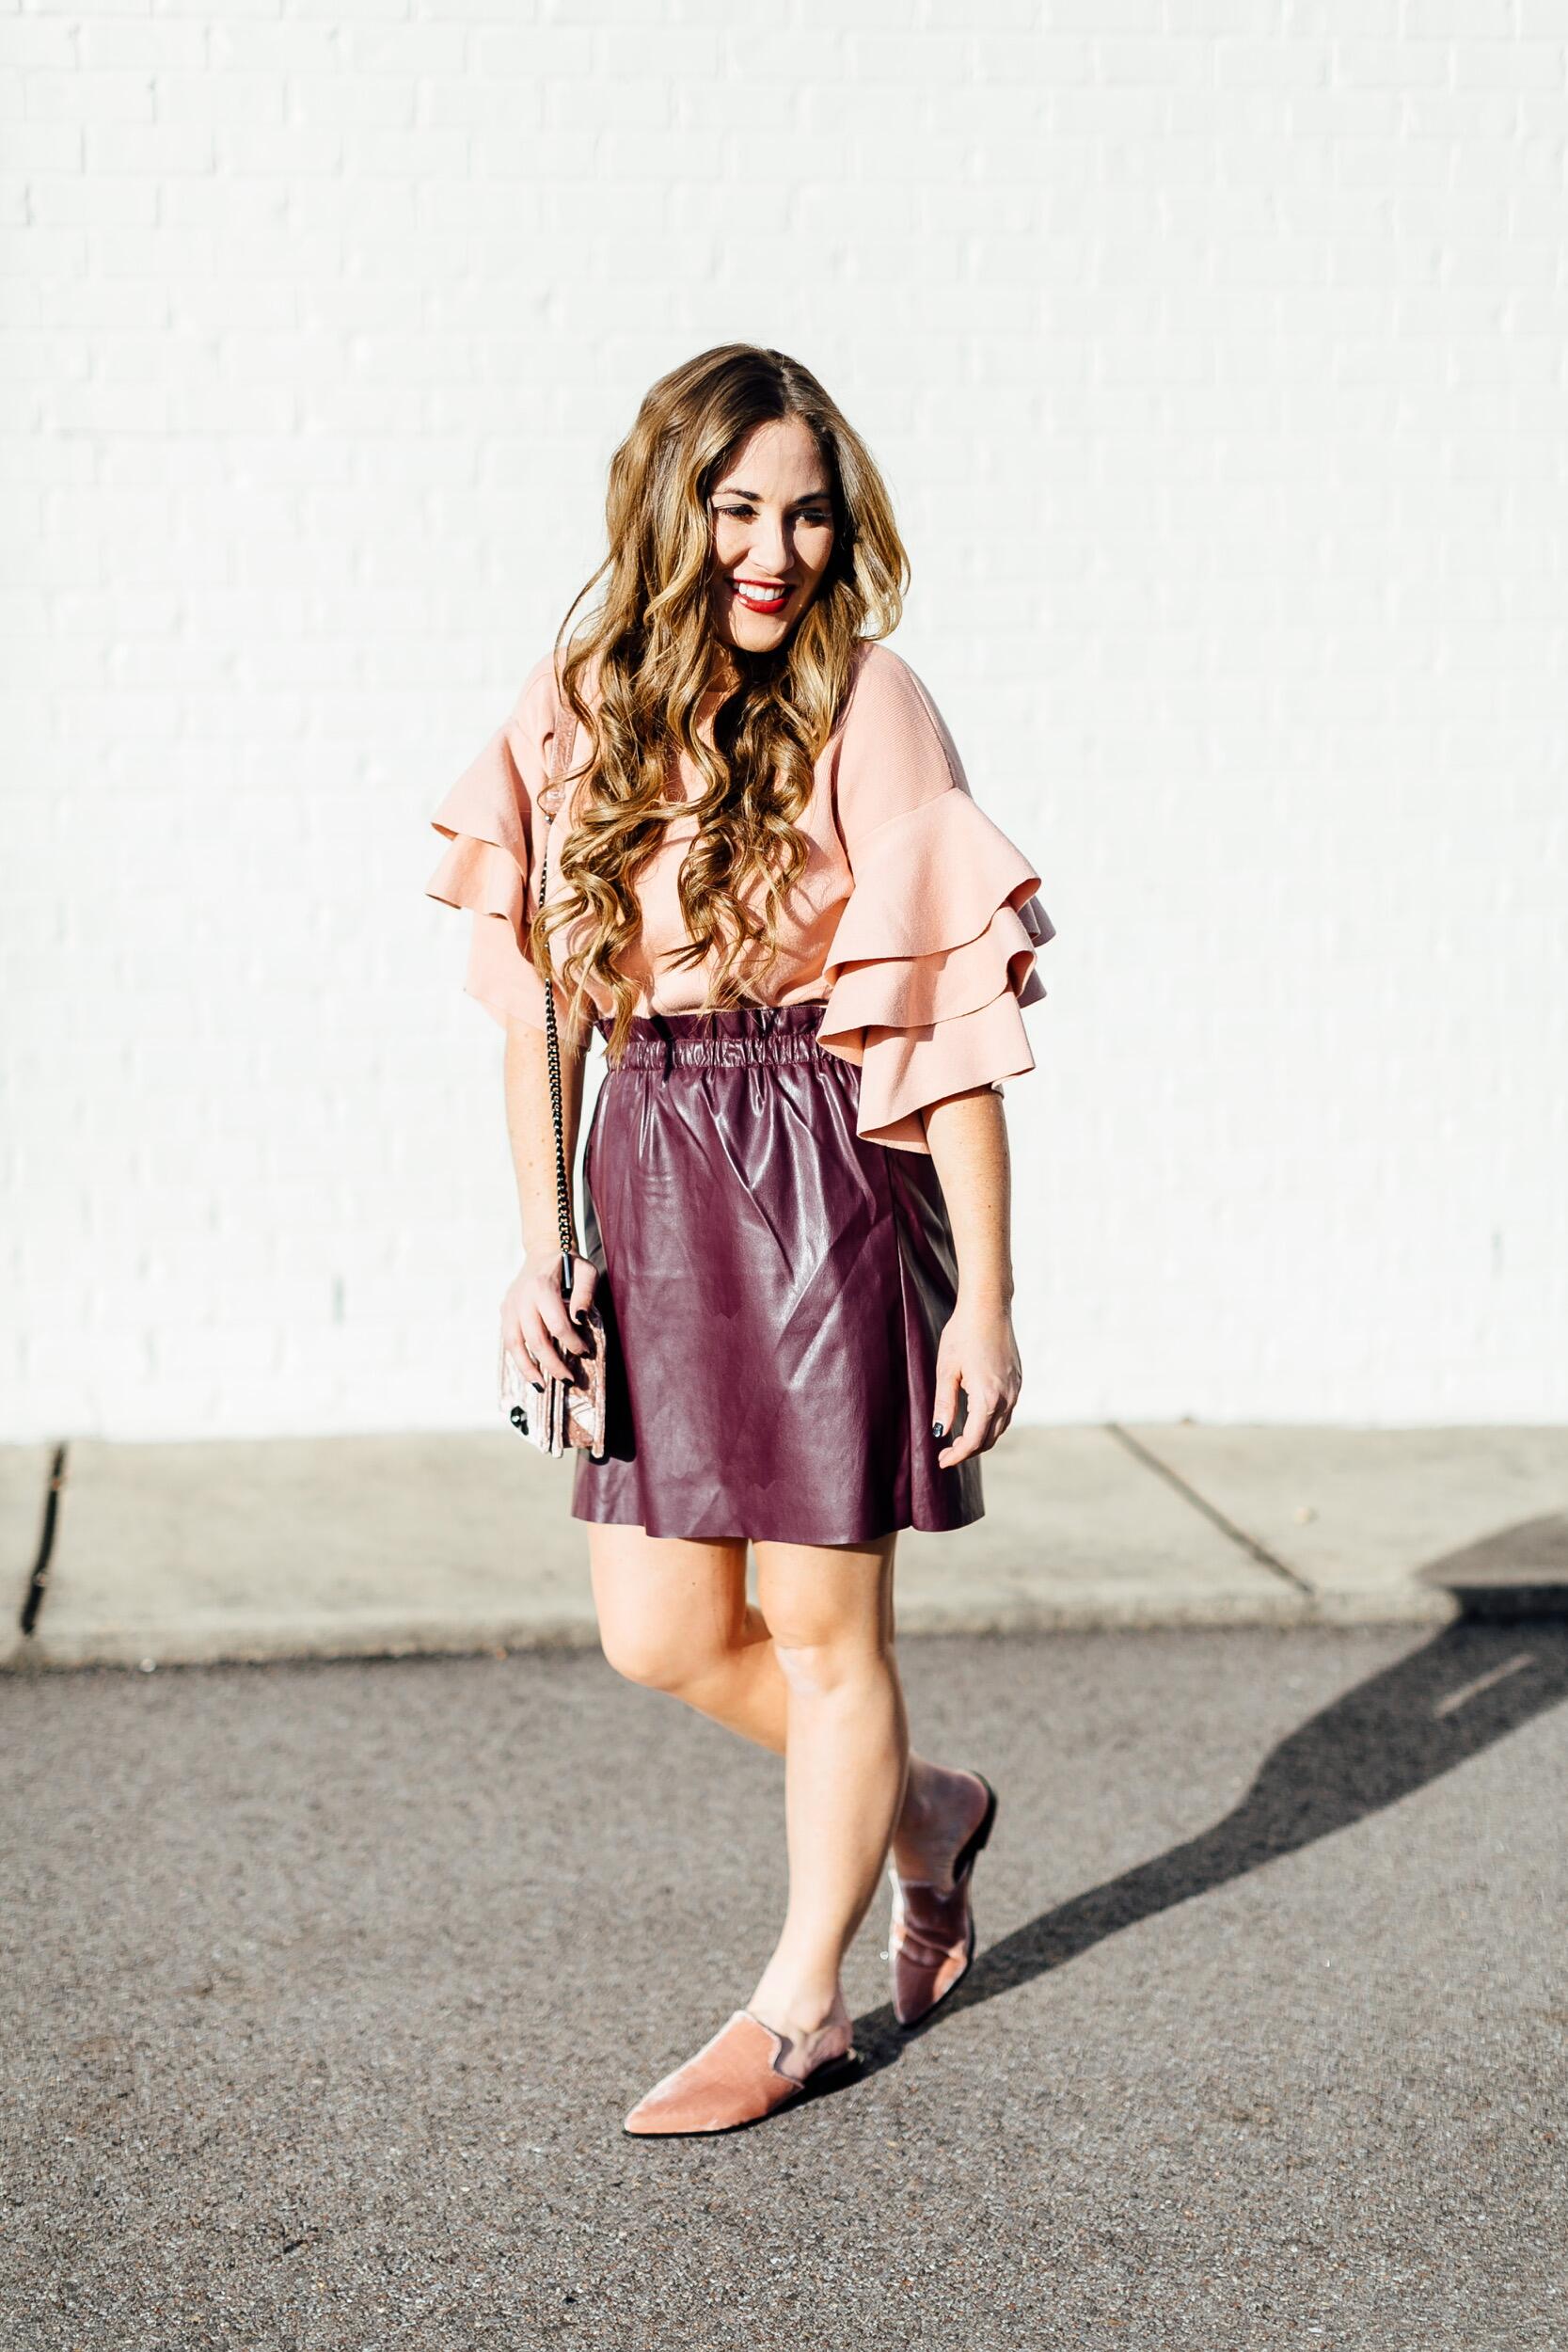 Trend Spin Linkup - Thanksgiving Dinner Attire by East Memphis fashion blogger Walking in Memphis in High Heels